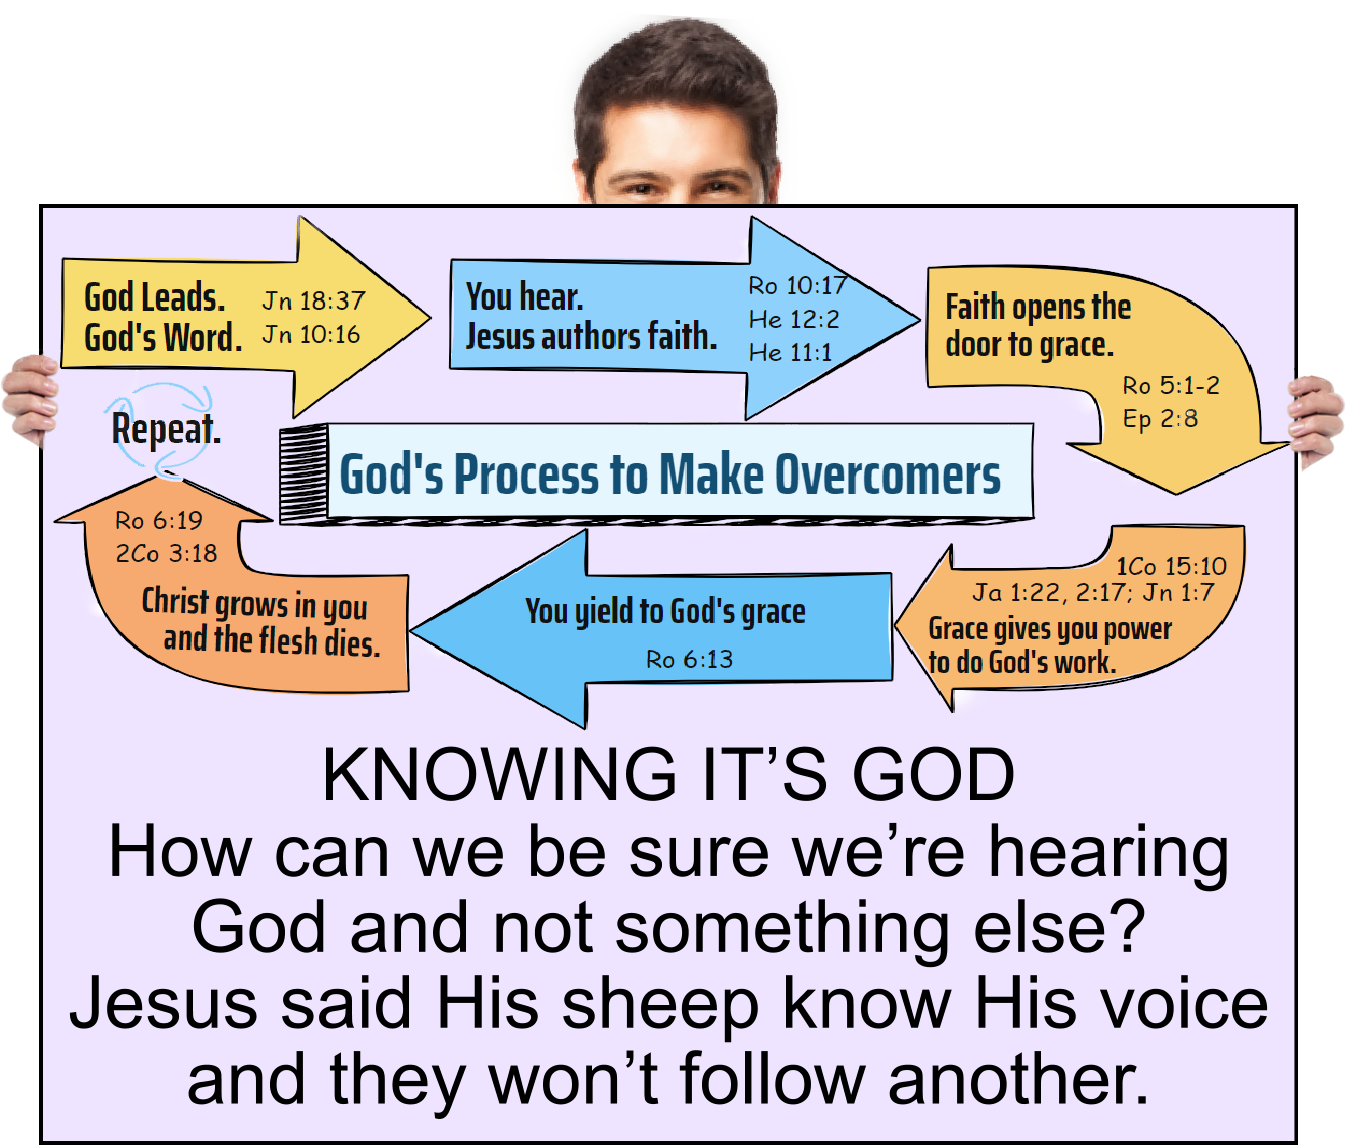 KNOWING IT’S GOD: How can we be sure we’re hearing God and not something else?